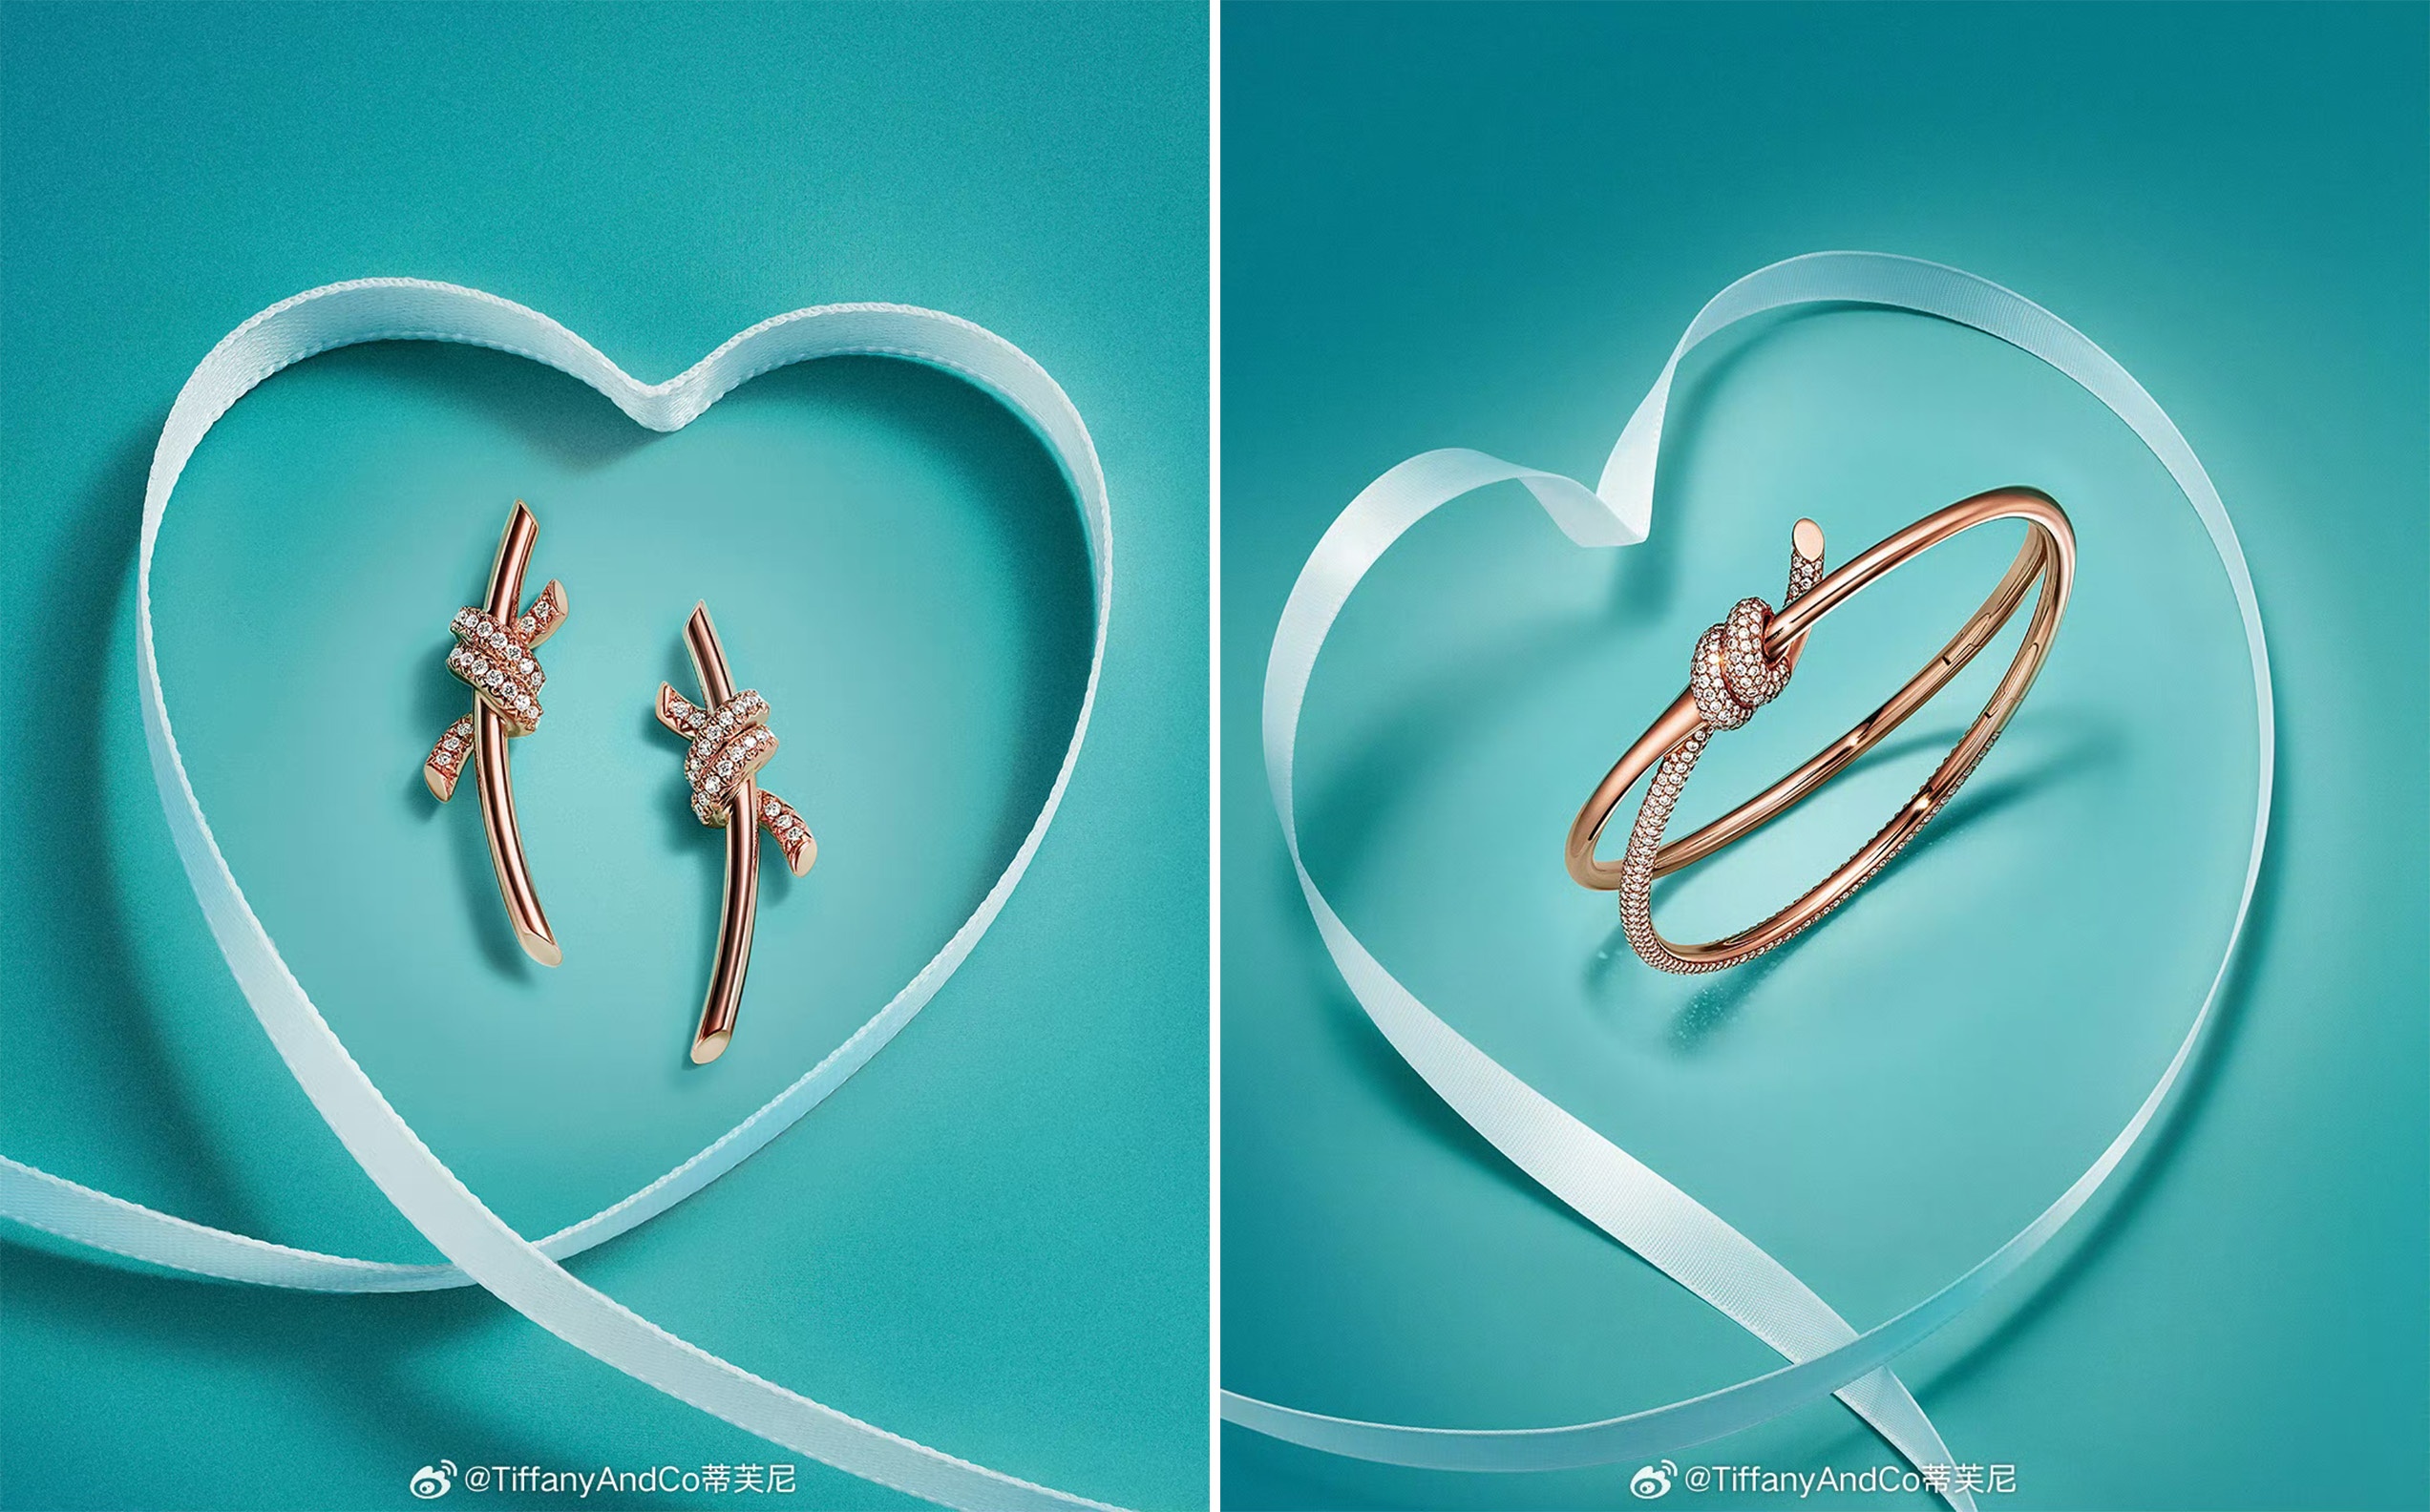 For 520, Tiffany & Co. debuted a new Tiffany Knot pendant in China. Image: Tiffany